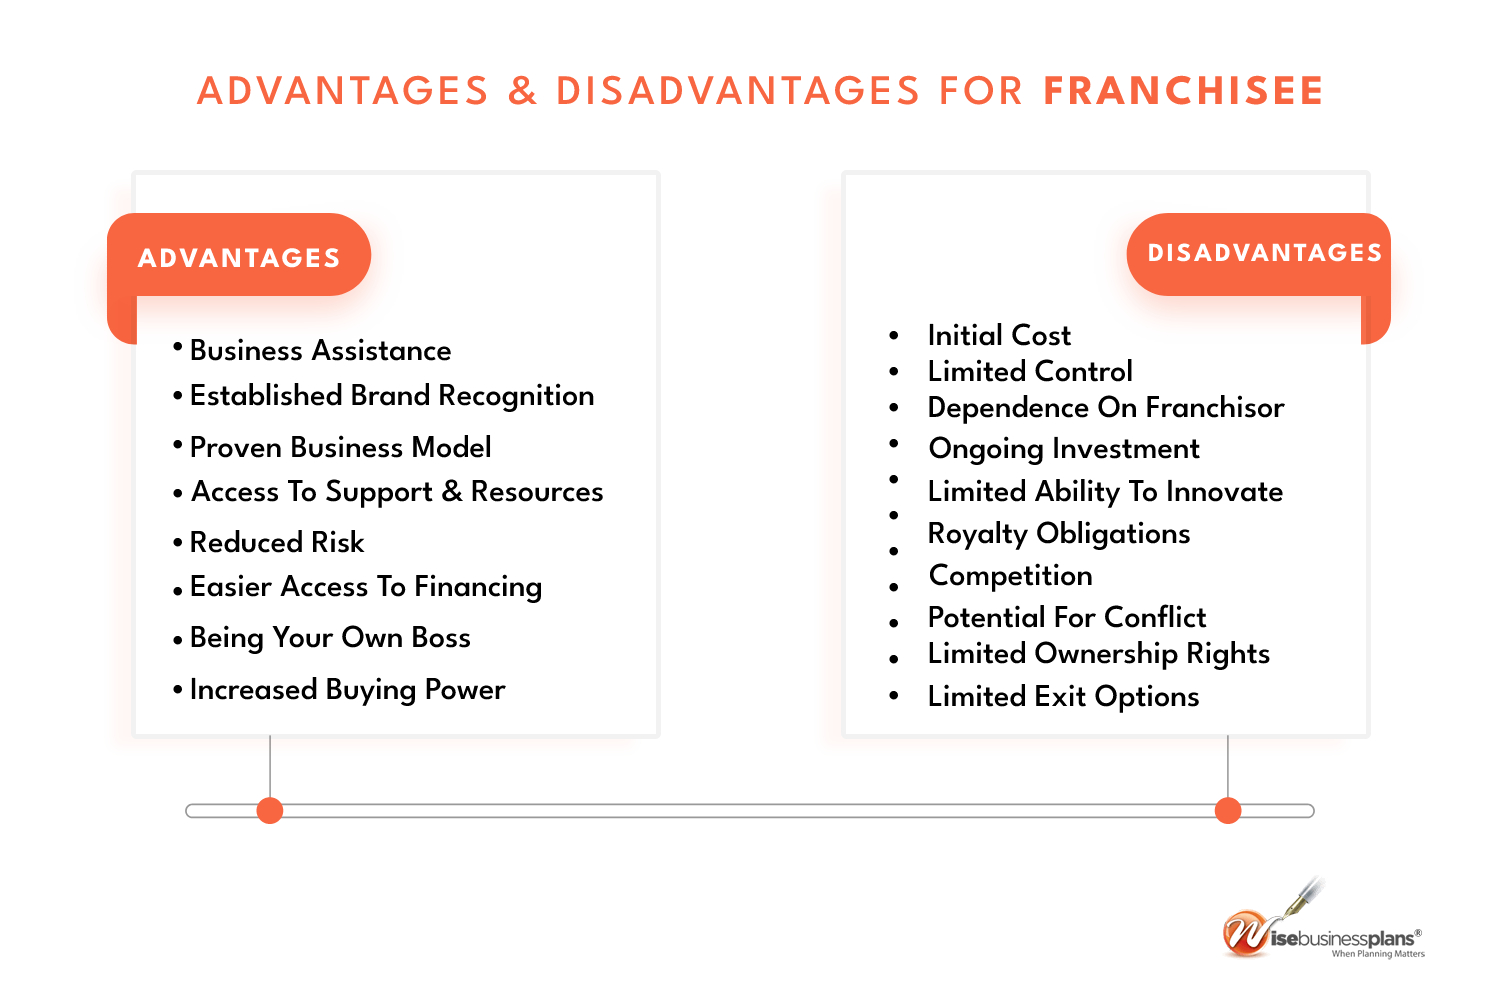 Advantages and disadvantages of franchising for franchisee